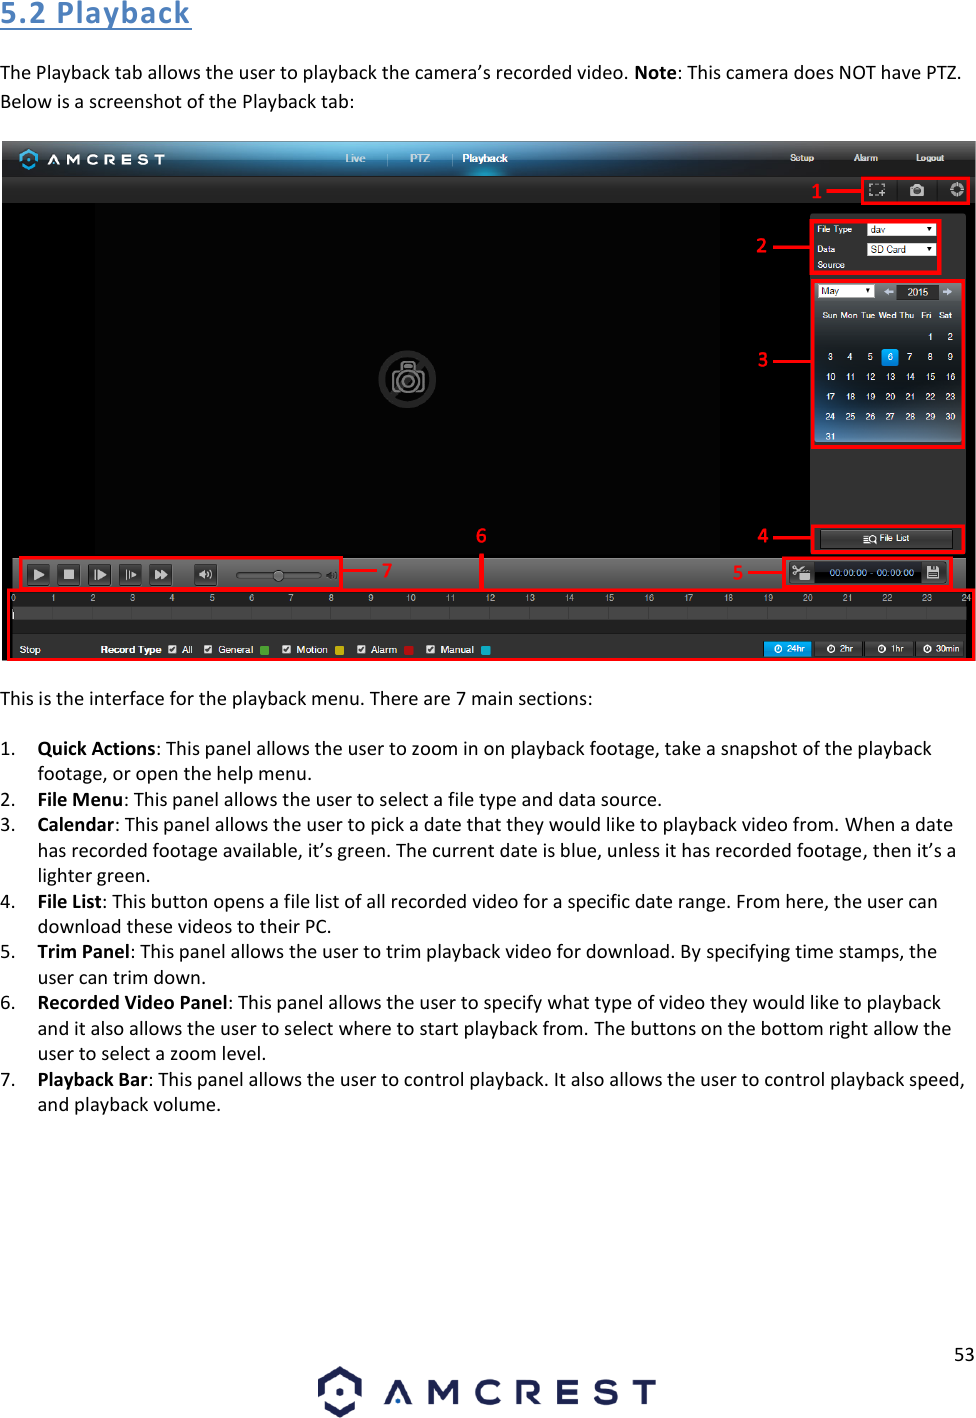 53  5.2 Playback The Playback tab allows the user to playback the camera’s recorded video. Note: This camera does NOT have PTZ. Below is a screenshot of the Playback tab:  This is the interface for the playback menu. There are 7 main sections: 1. Quick Actions: This panel allows the user to zoom in on playback footage, take a snapshot of the playback footage, or open the help menu. 2. File Menu: This panel allows the user to select a file type and data source. 3. Calendar: This panel allows the user to pick a date that they would like to playback video from. When a date has recorded footage available, it’s green. The current date is blue, unless it has recorded footage, then it’s a lighter green. 4. File List: This button opens a file list of all recorded video for a specific date range. From here, the user can download these videos to their PC. 5. Trim Panel: This panel allows the user to trim playback video for download. By specifying time stamps, the user can trim down.  6. Recorded Video Panel: This panel allows the user to specify what type of video they would like to playback and it also allows the user to select where to start playback from. The buttons on the bottom right allow the user to select a zoom level. 7. Playback Bar: This panel allows the user to control playback. It also allows the user to control playback speed, and playback volume. 